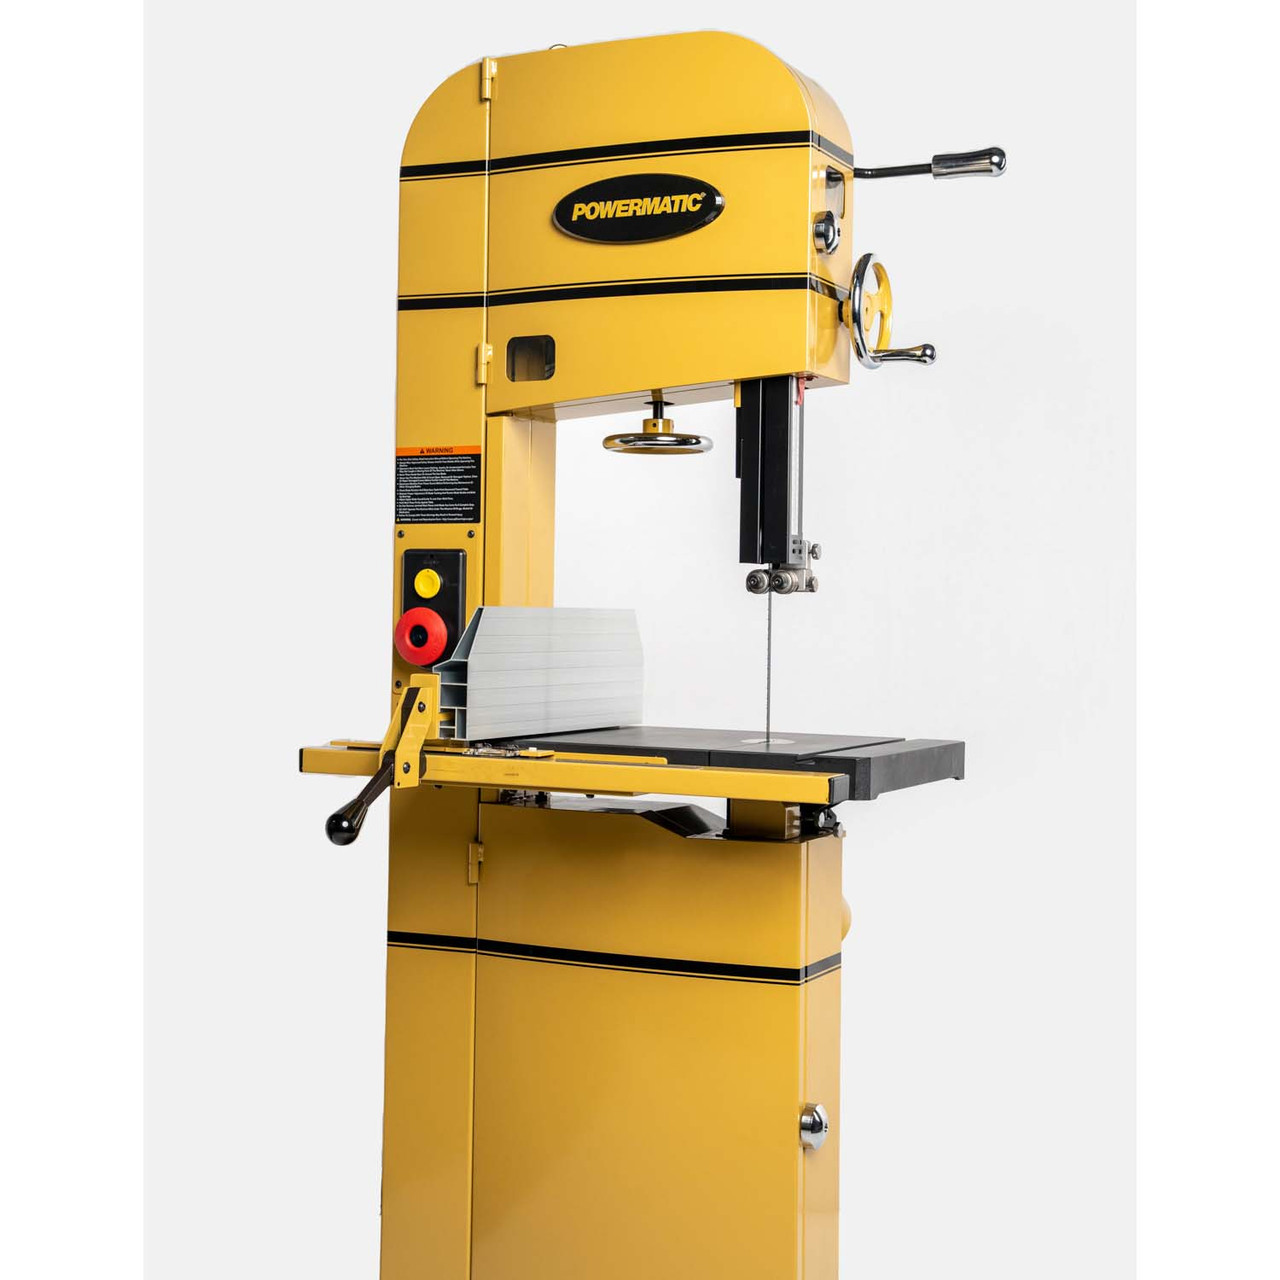 Powermatic, PM1-1791500T, PM1500T 15" Bandsaw with ArmorGlide, 3HP 1PH 230V